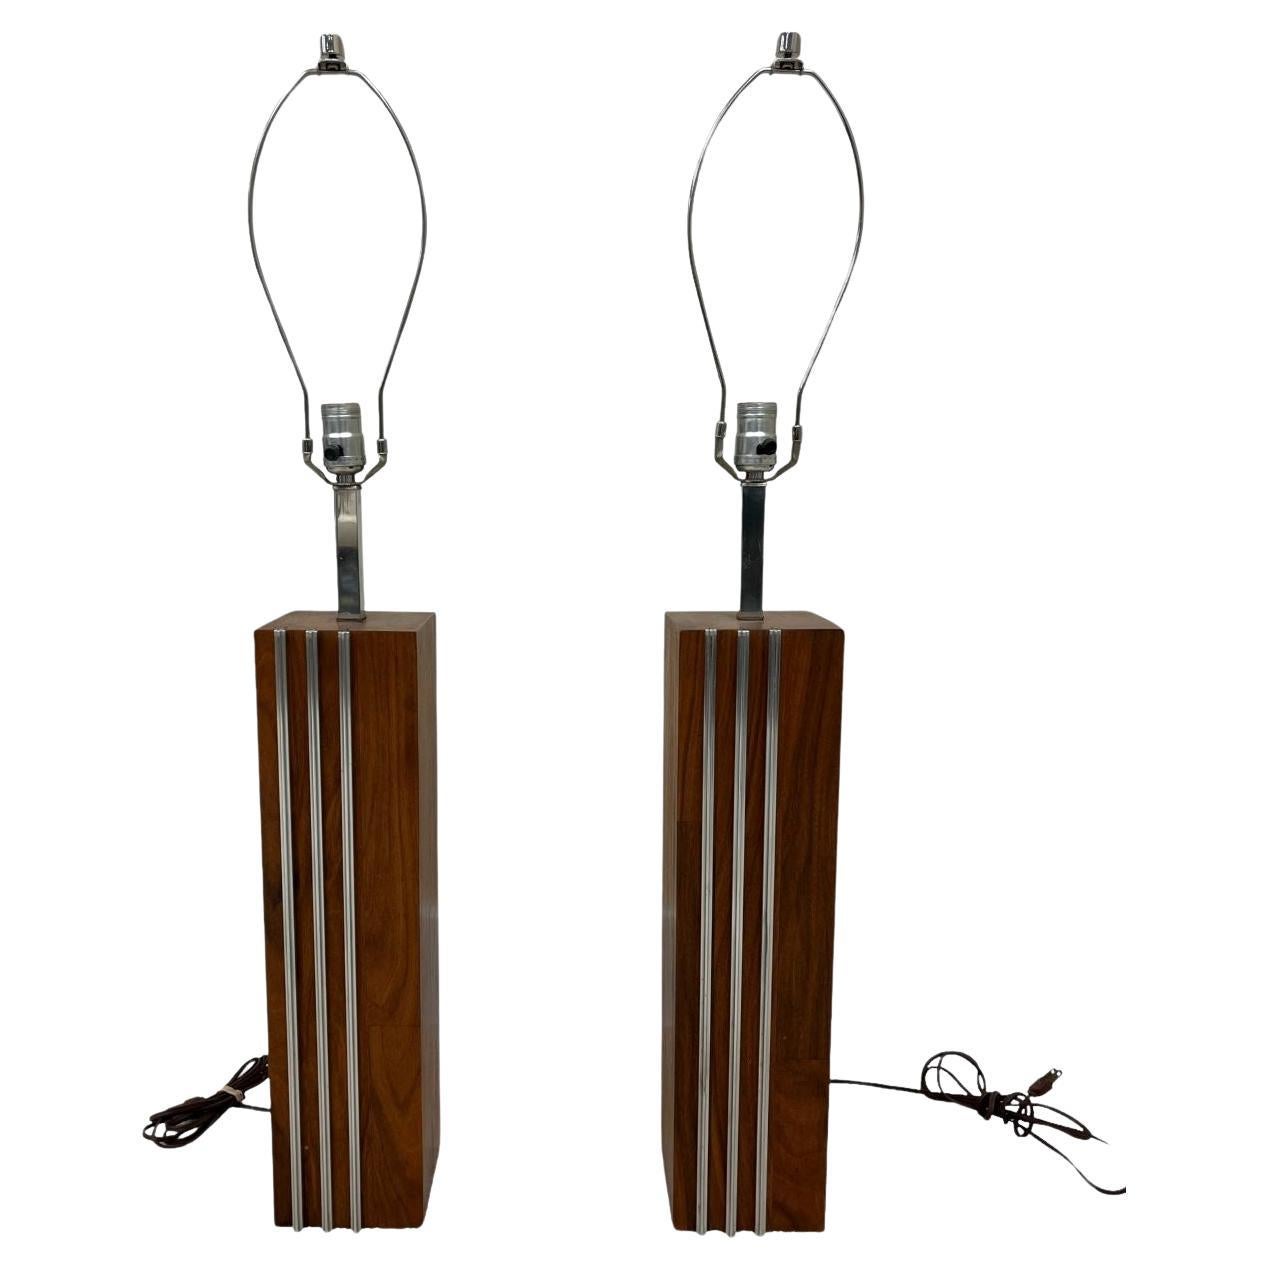 Pair of Chrome And Walnut Mid Century Lamps By Laurel Lamp Co.    